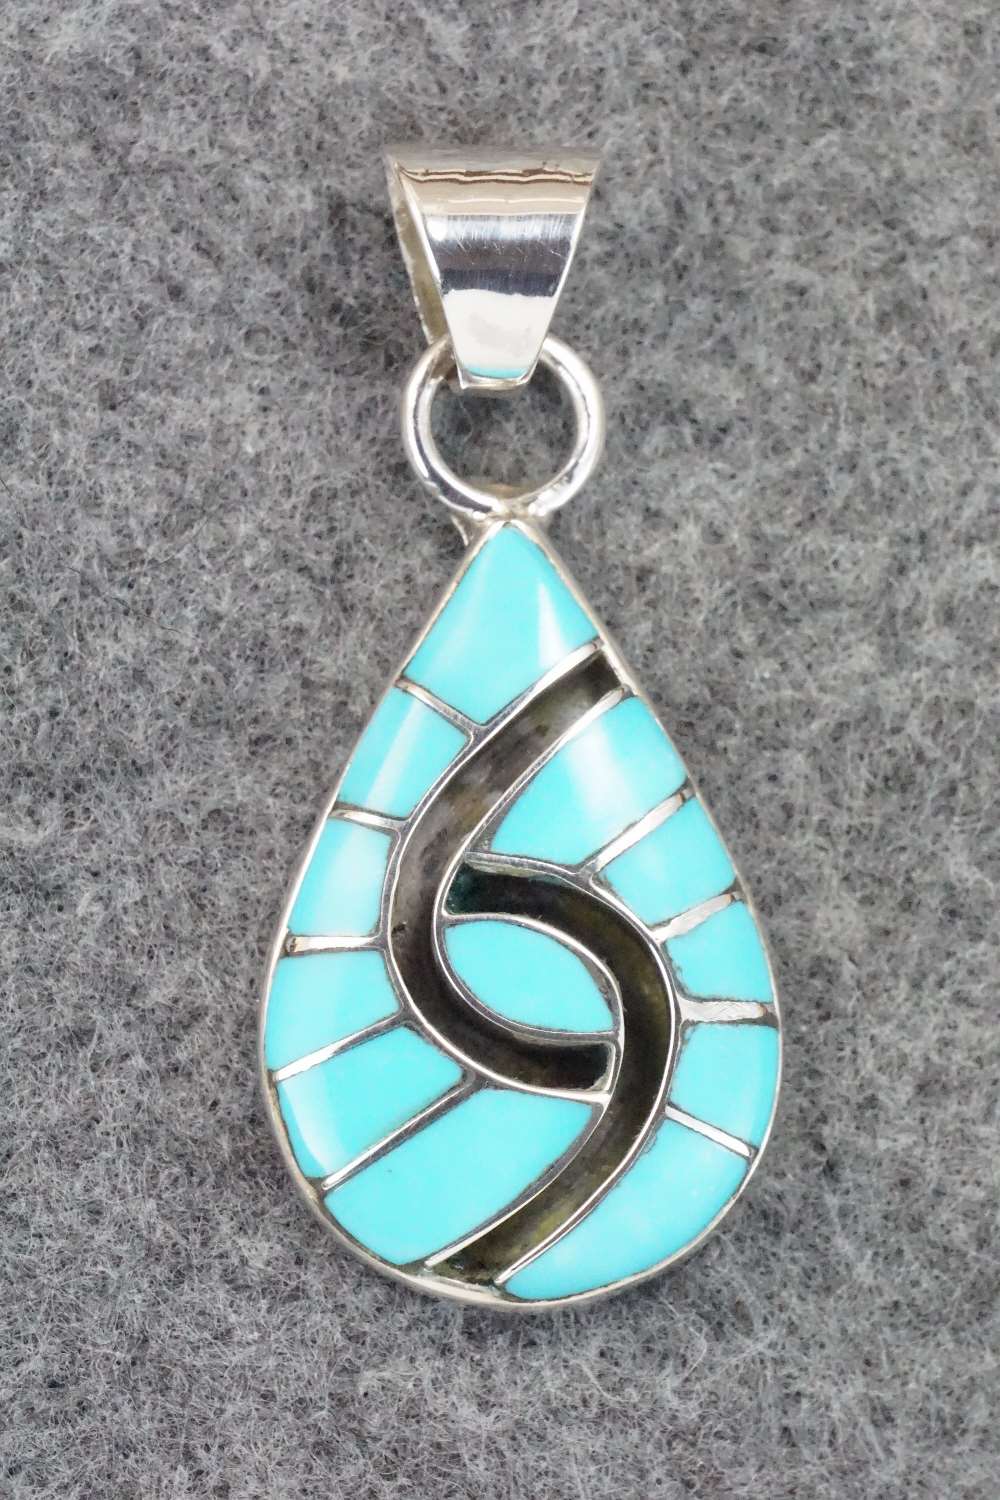 Turquoise & Sterling Silver Pendant - Amy Wesley